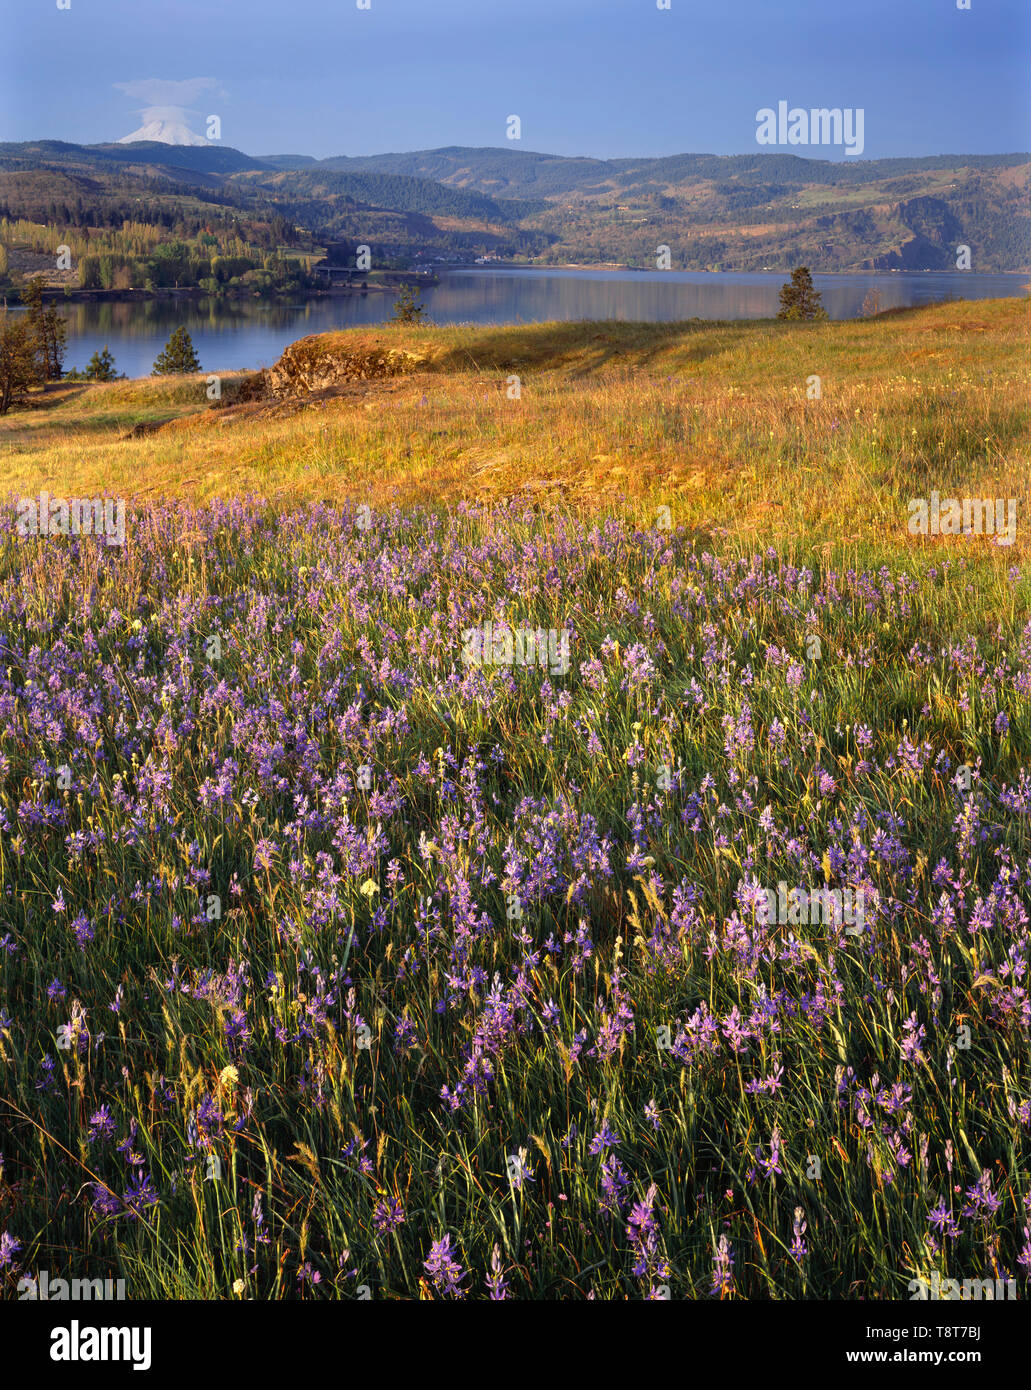 USA, Washington, Columbia River Gorge National Scenic Area  View southwest with common camas blooming in Catherine Creek area; in the distance are the Stock Photo